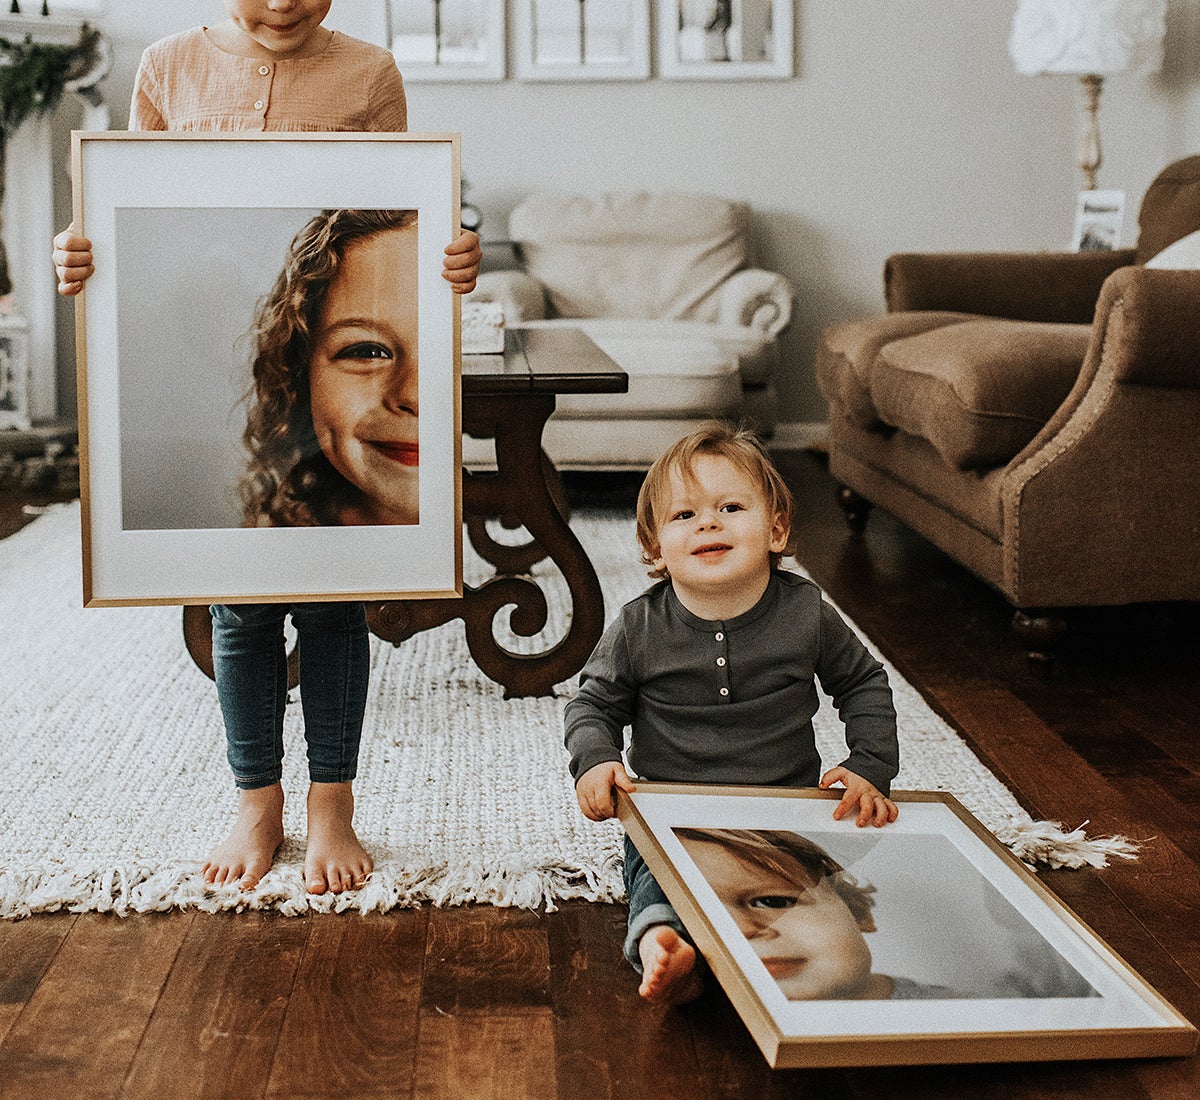 Two young siblings hold up enlarged and framed photos of themselves